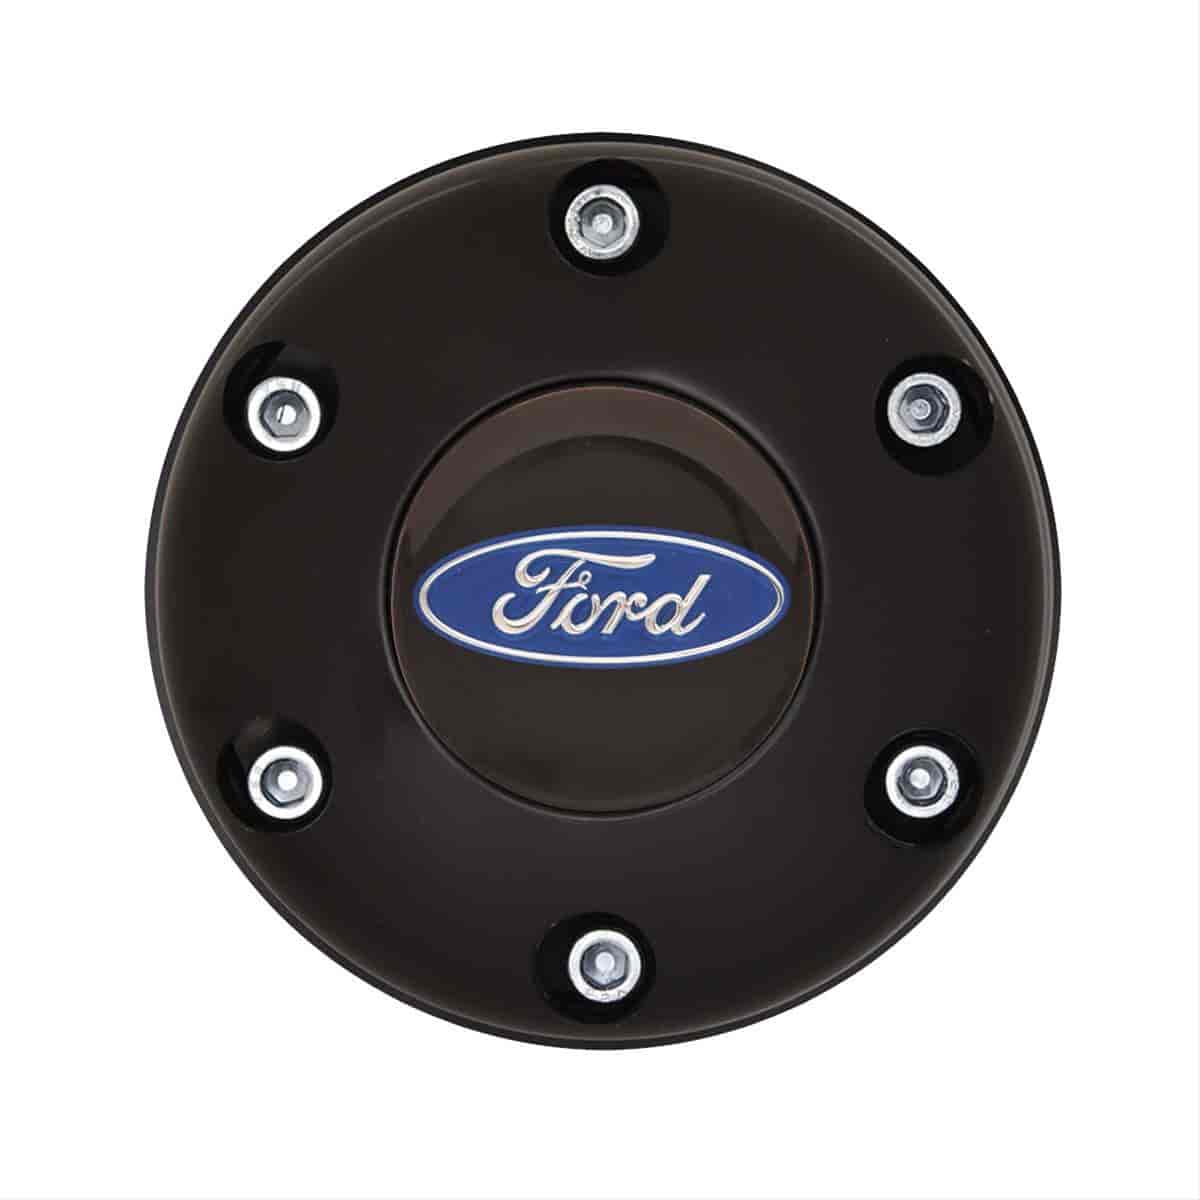 GT3 Gasser/Euro Style Horn Button Ford Oval Colored 6-Hole Style Black Anodized